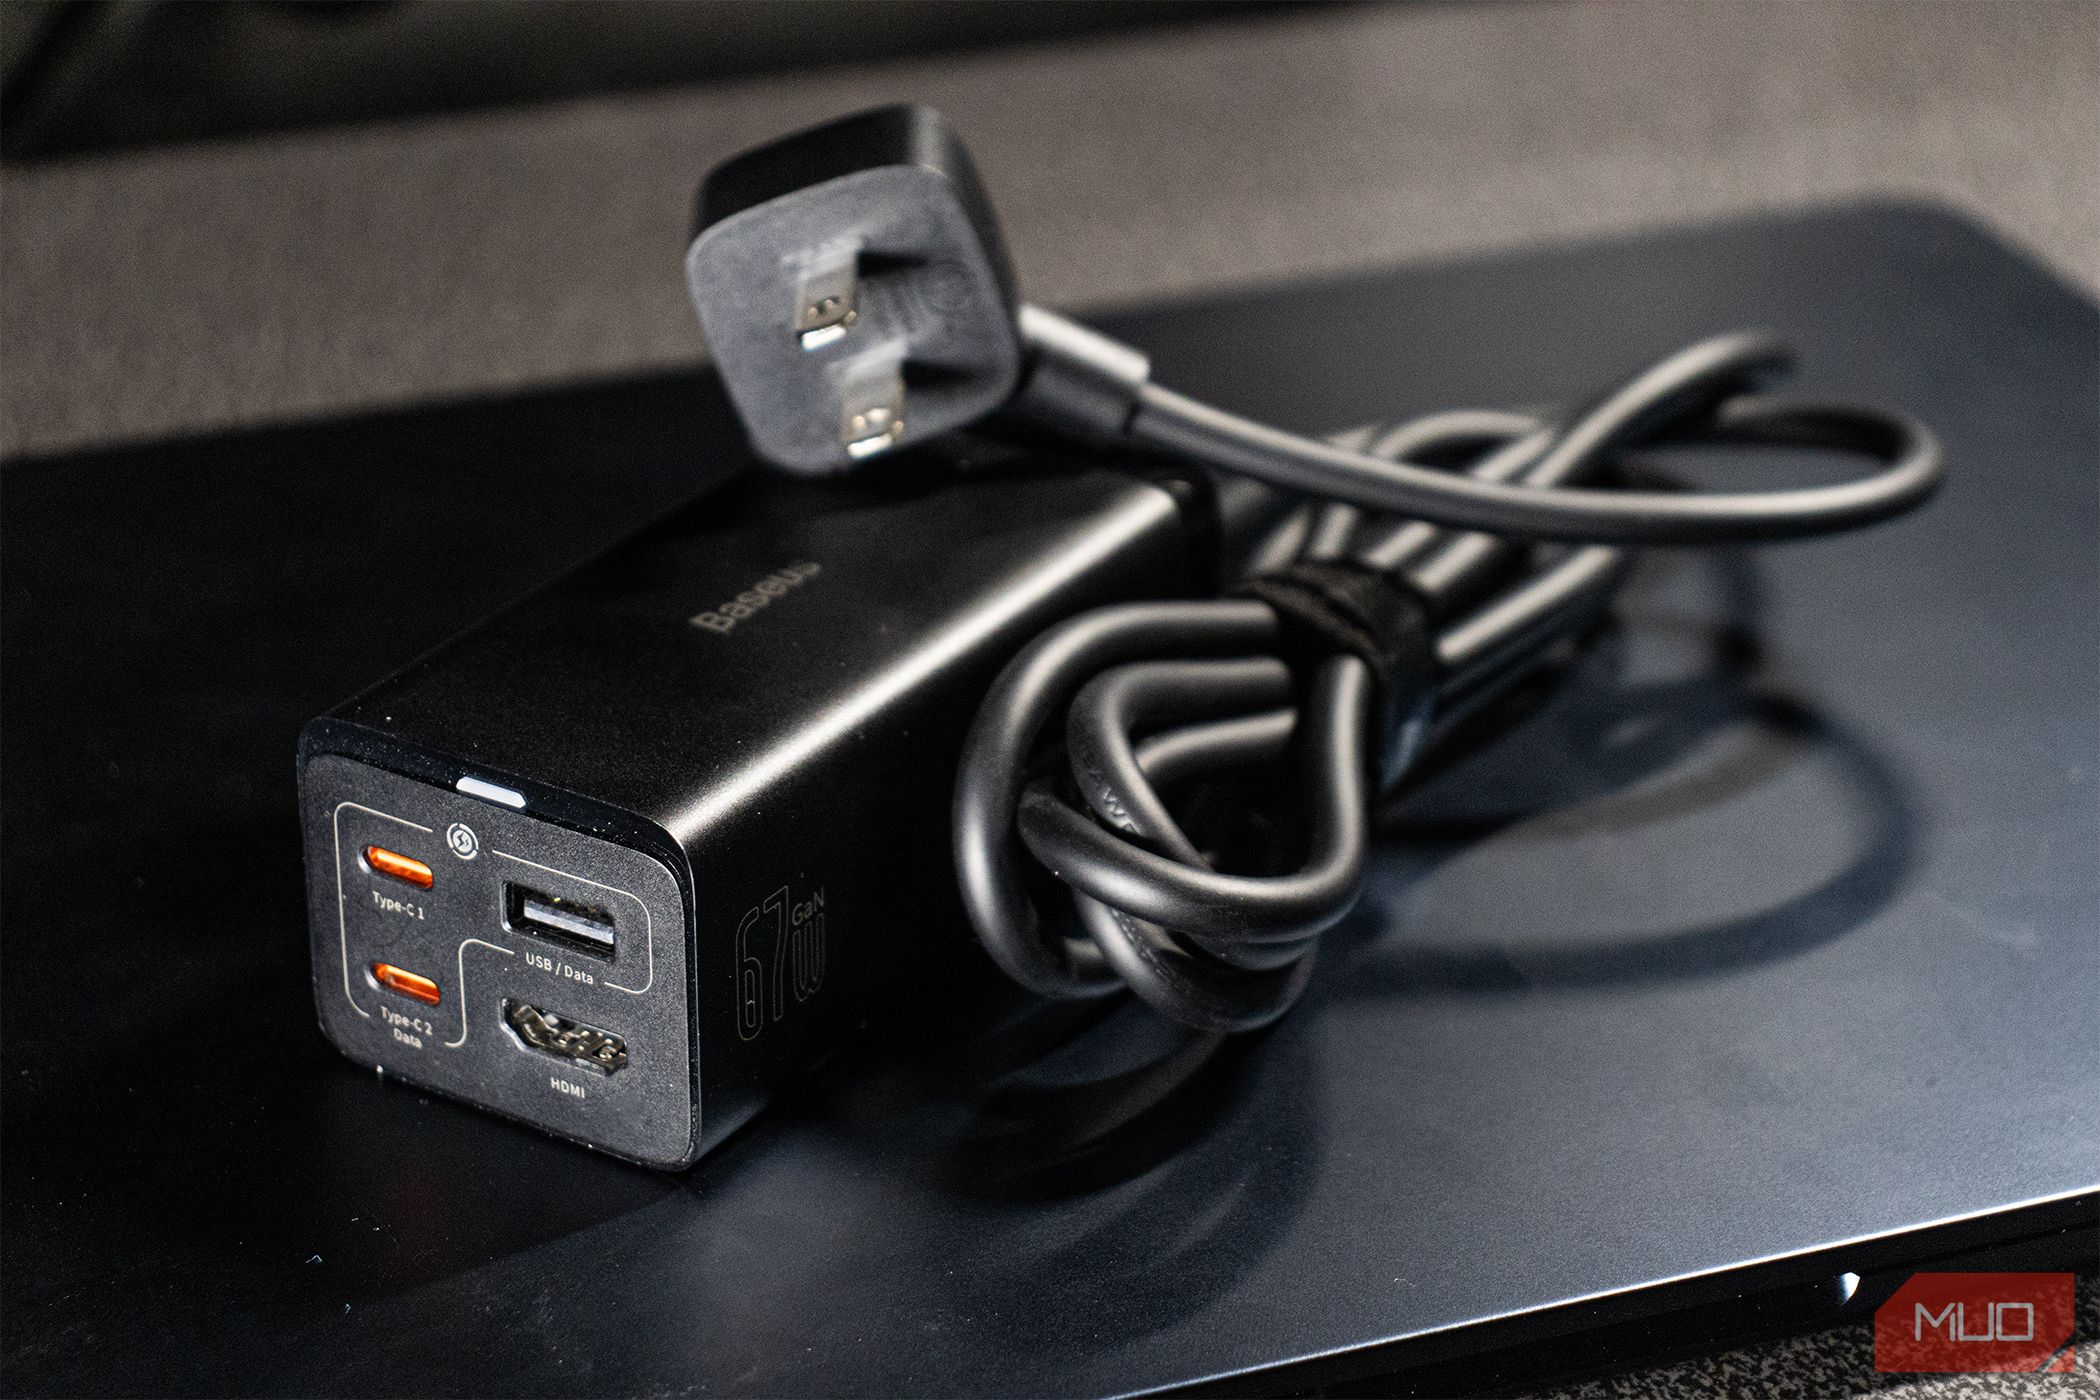 Baseus GaN5 4-in-1 Charging Hub Review: A Charger and Docking Station in One